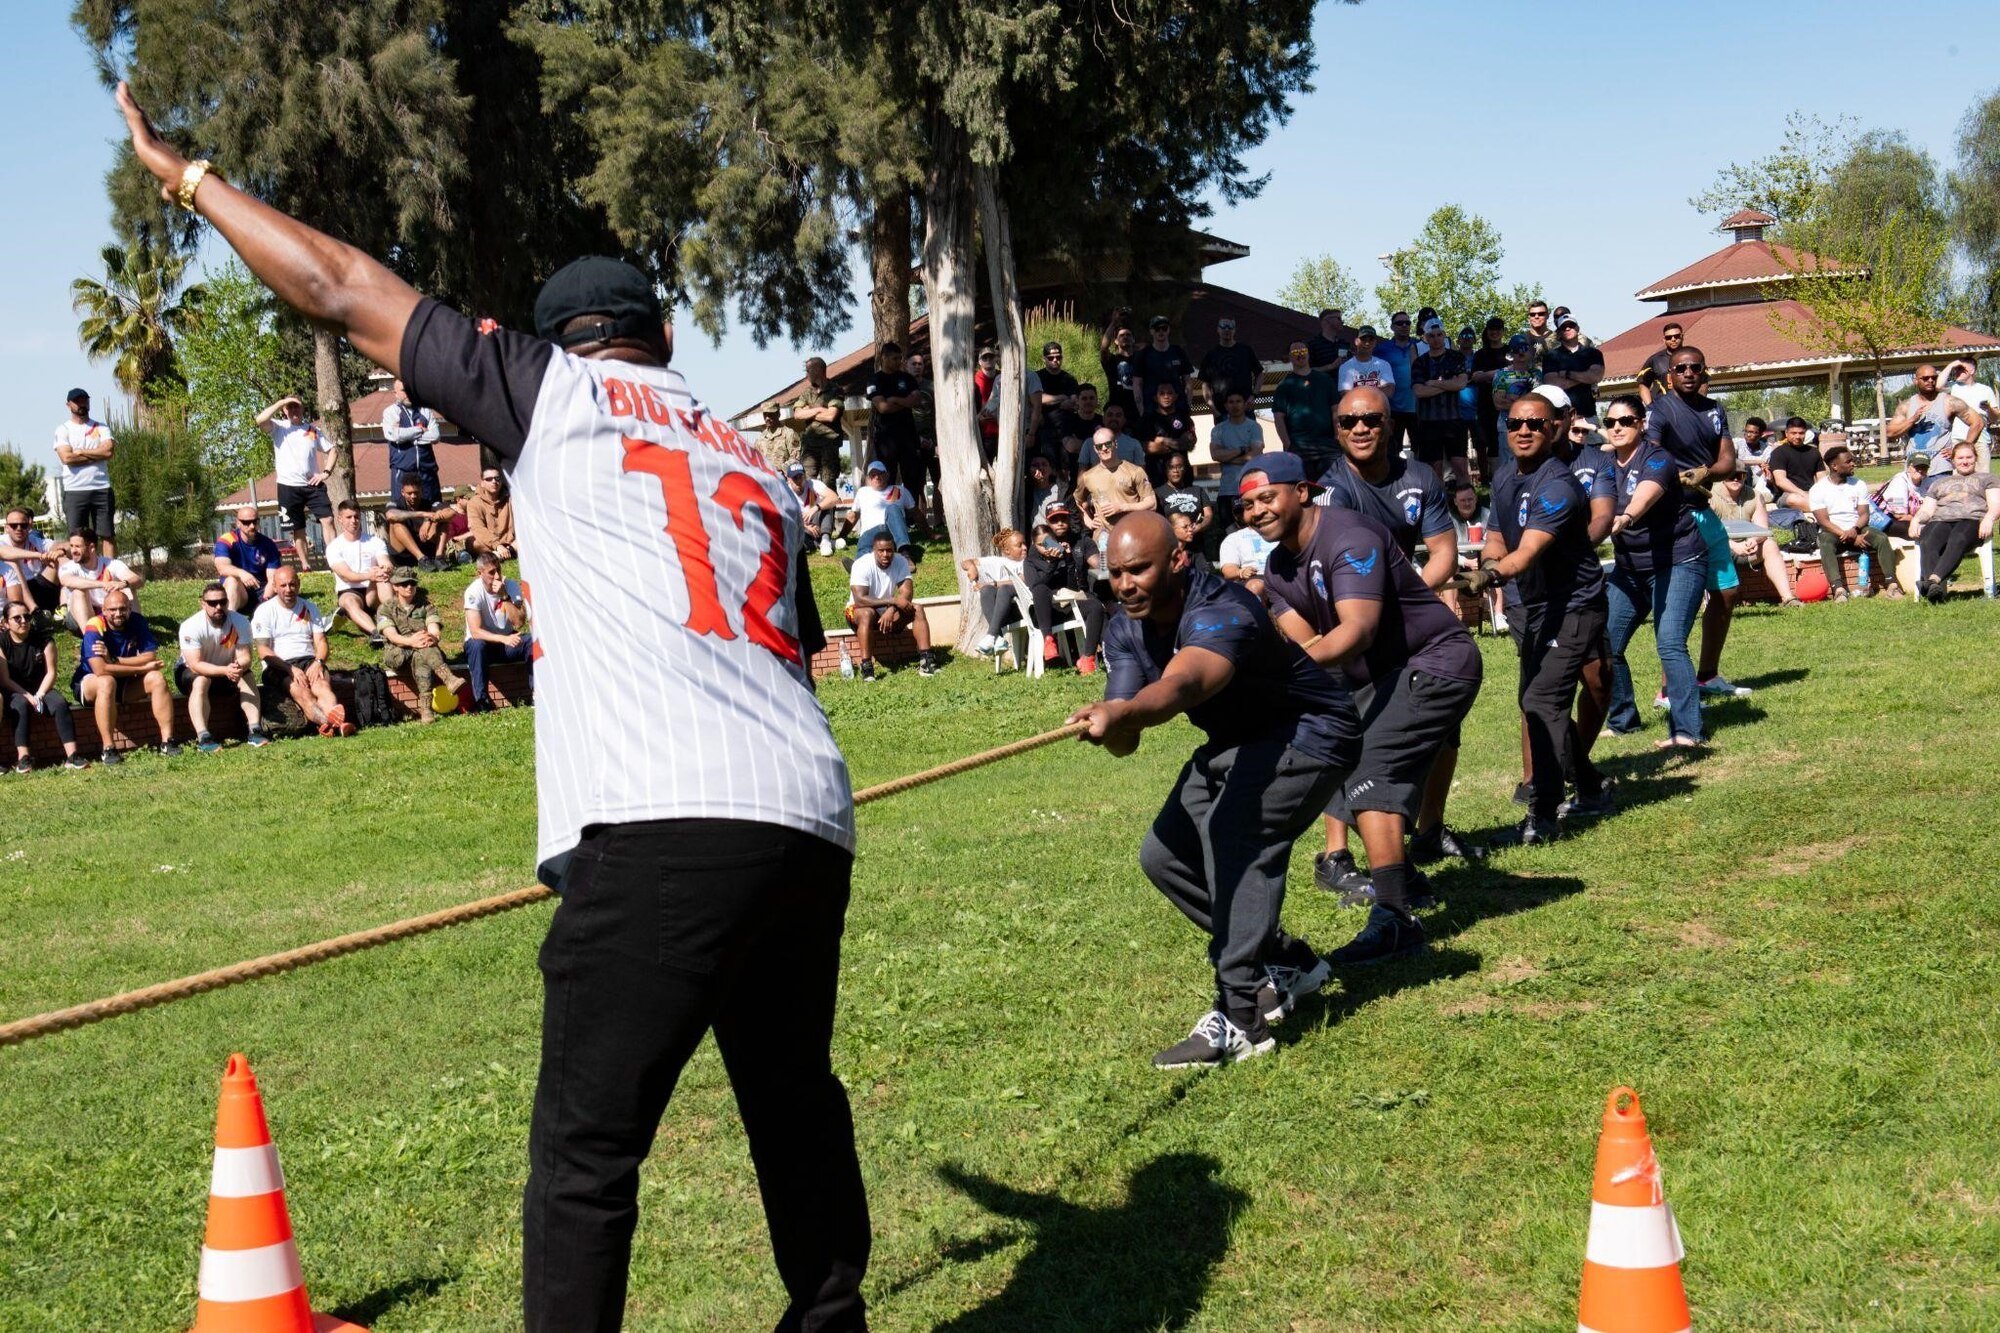 Senior enlisted leaders from various 39th Air Base Wing units participated in a chiefs versus commanders tug of war tournament during the 39 ABW sports day at Incirlik Air Base, Turkey, April 14, 2022. During the event, U.S. military members, civilians, Turkish local national employees and NATO allies competed in a series of scored athletic events and activities to kick off the spring season. This event was the first sports day that the 39th Air Base Wing hosted since 2013. (U.S. Air Force photo by Staff Sgt. Gabrielle Winn)